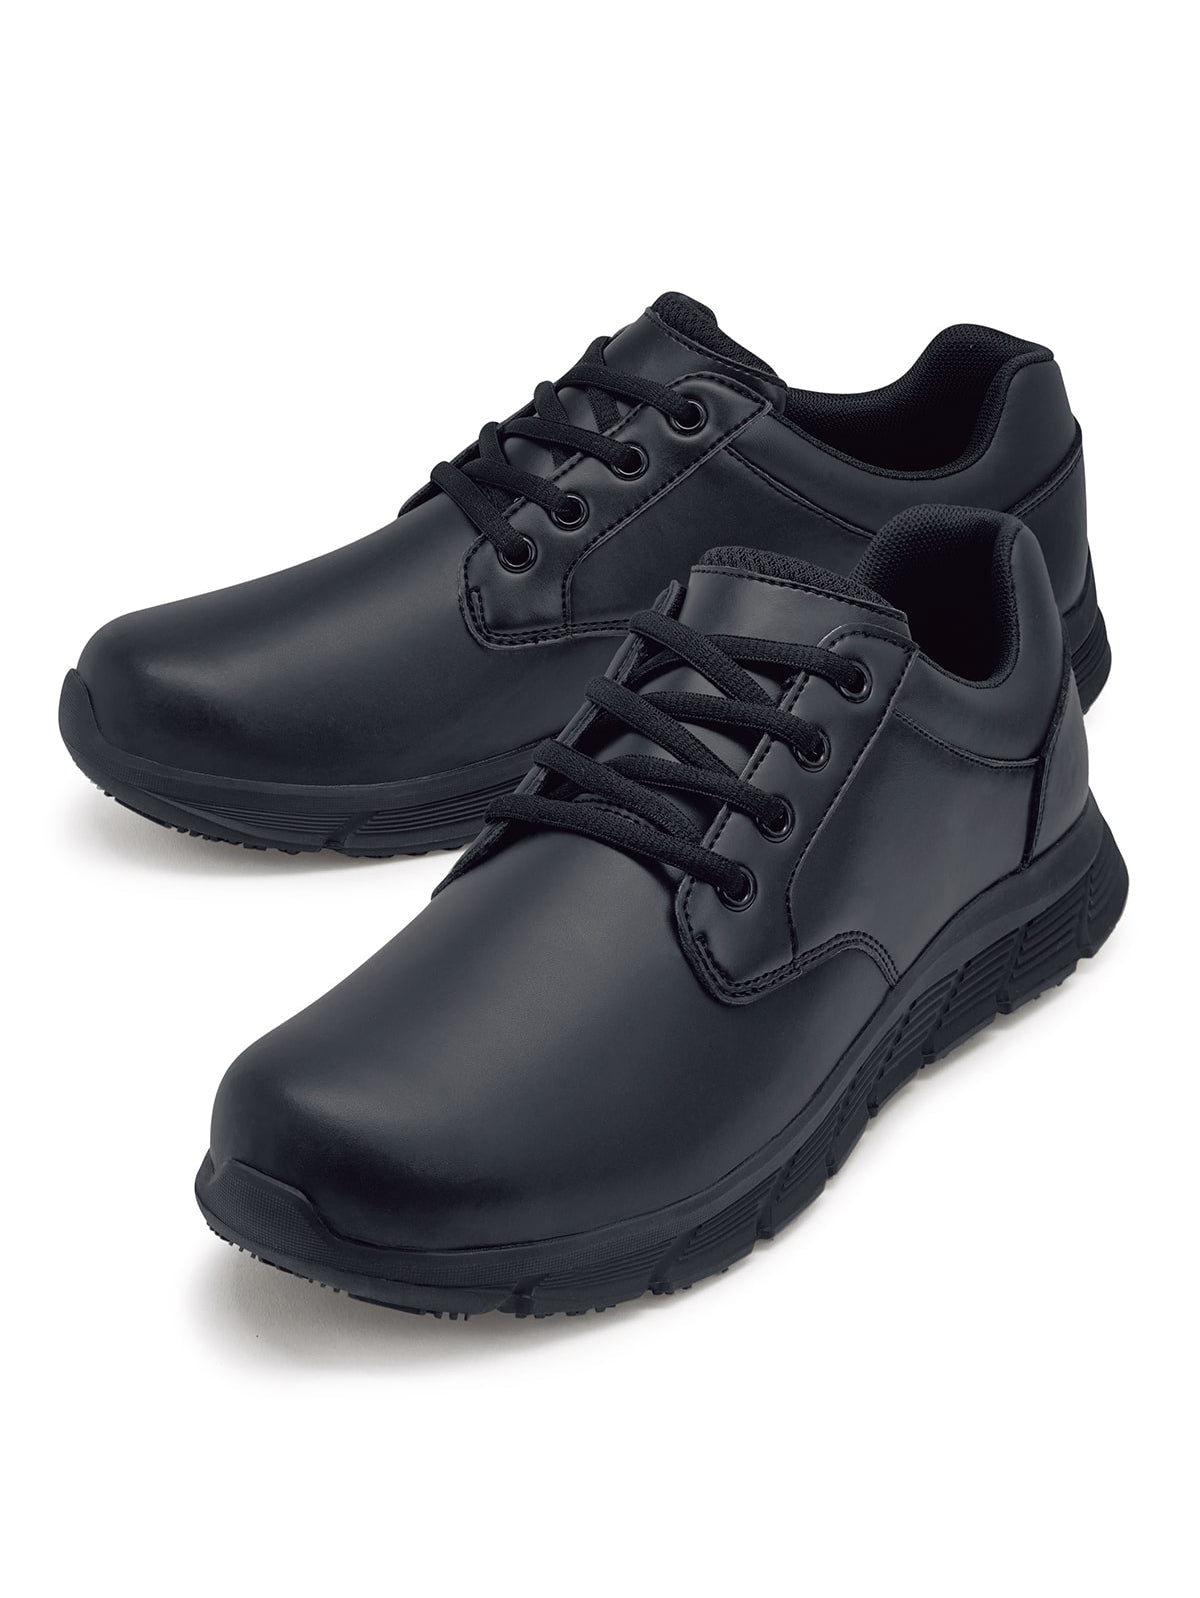 Women's Work Shoes Saloon II by Shoes For Crews -  ChefsCotton